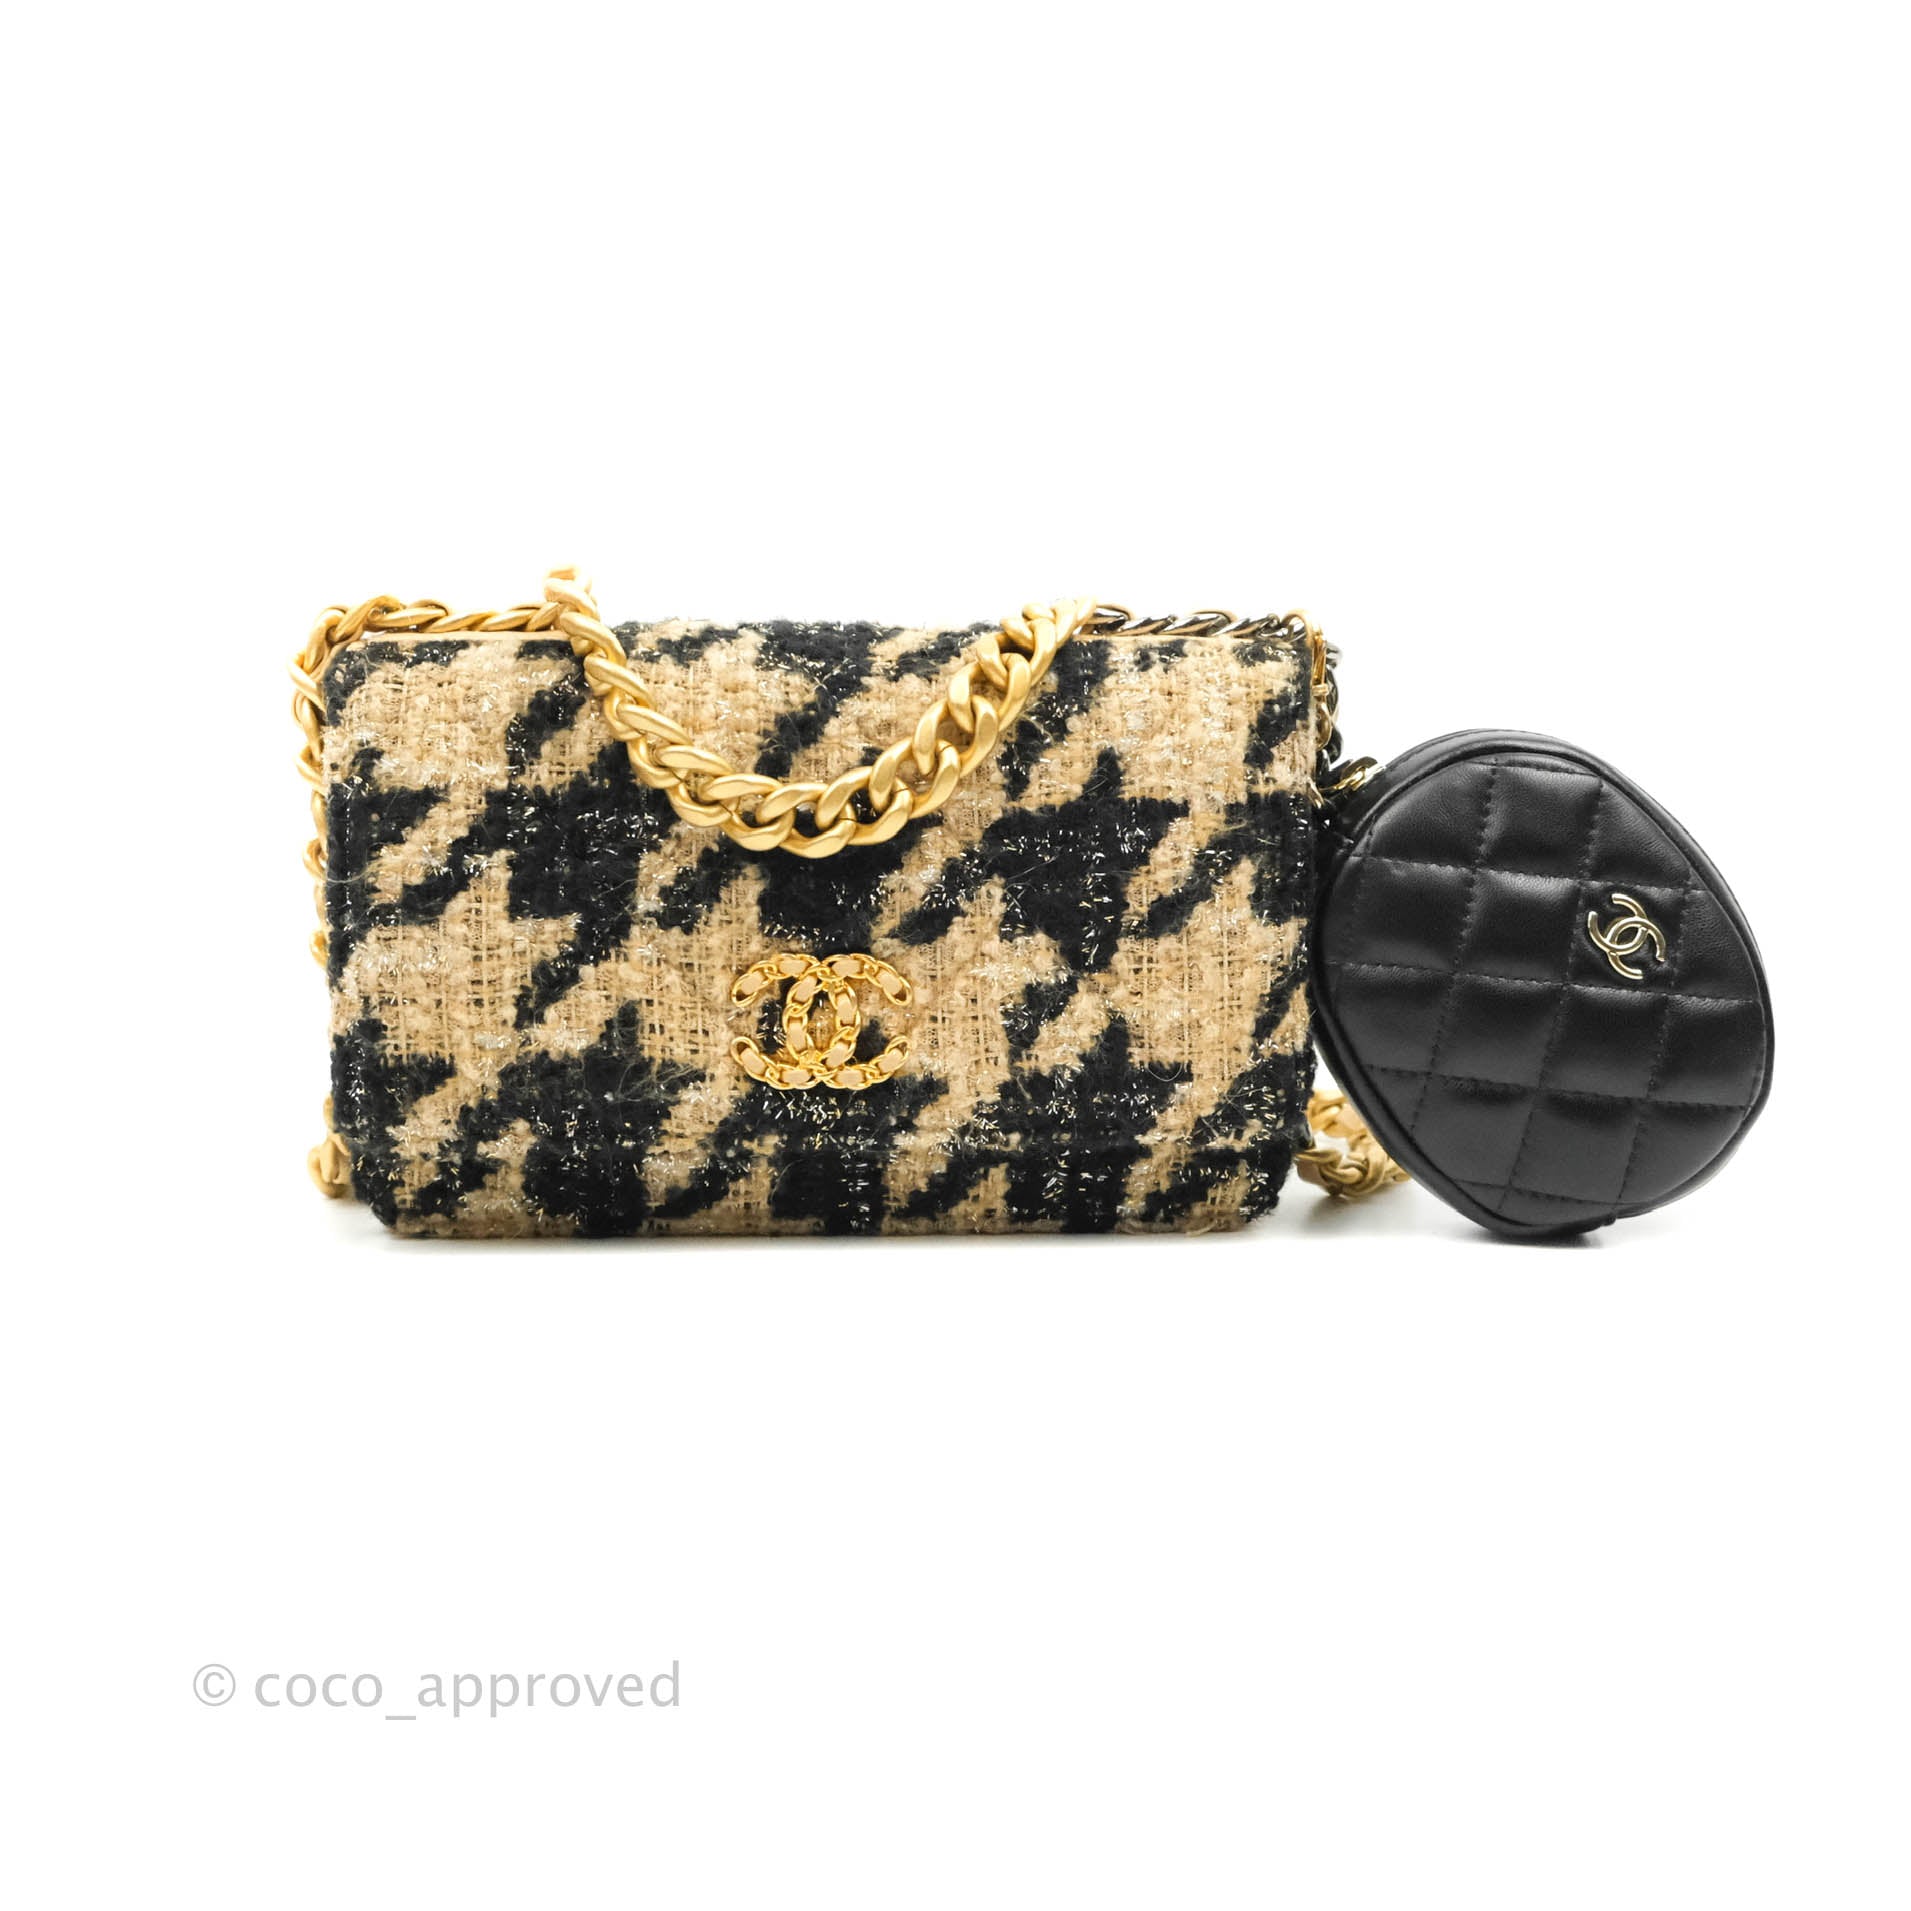 BAG REVIEW: MY SMALL TWEED CHANEL 19 + COMPARISON WITH LARGE TWEED CHANEL 19